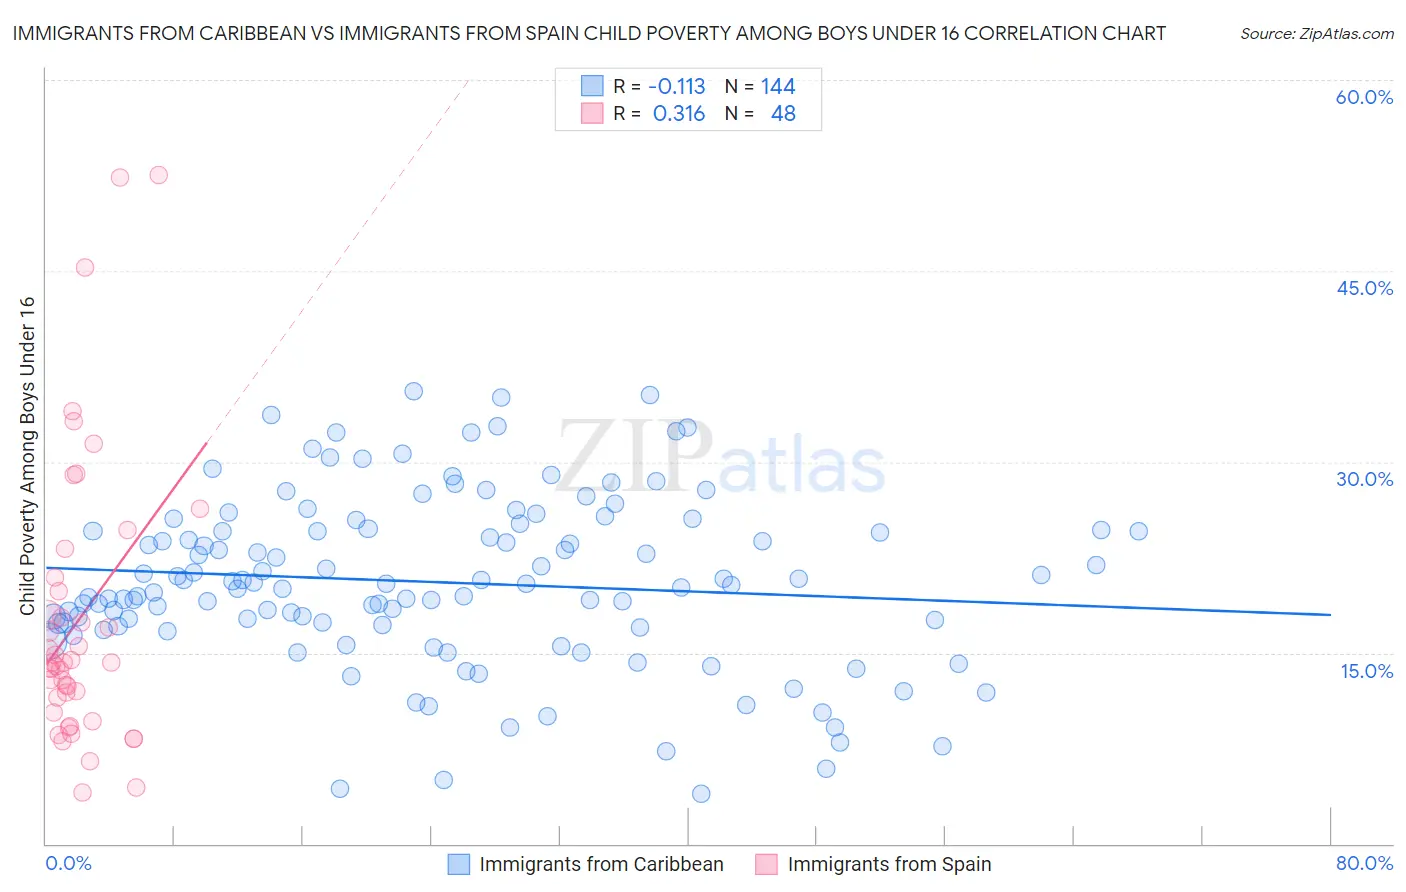 Immigrants from Caribbean vs Immigrants from Spain Child Poverty Among Boys Under 16